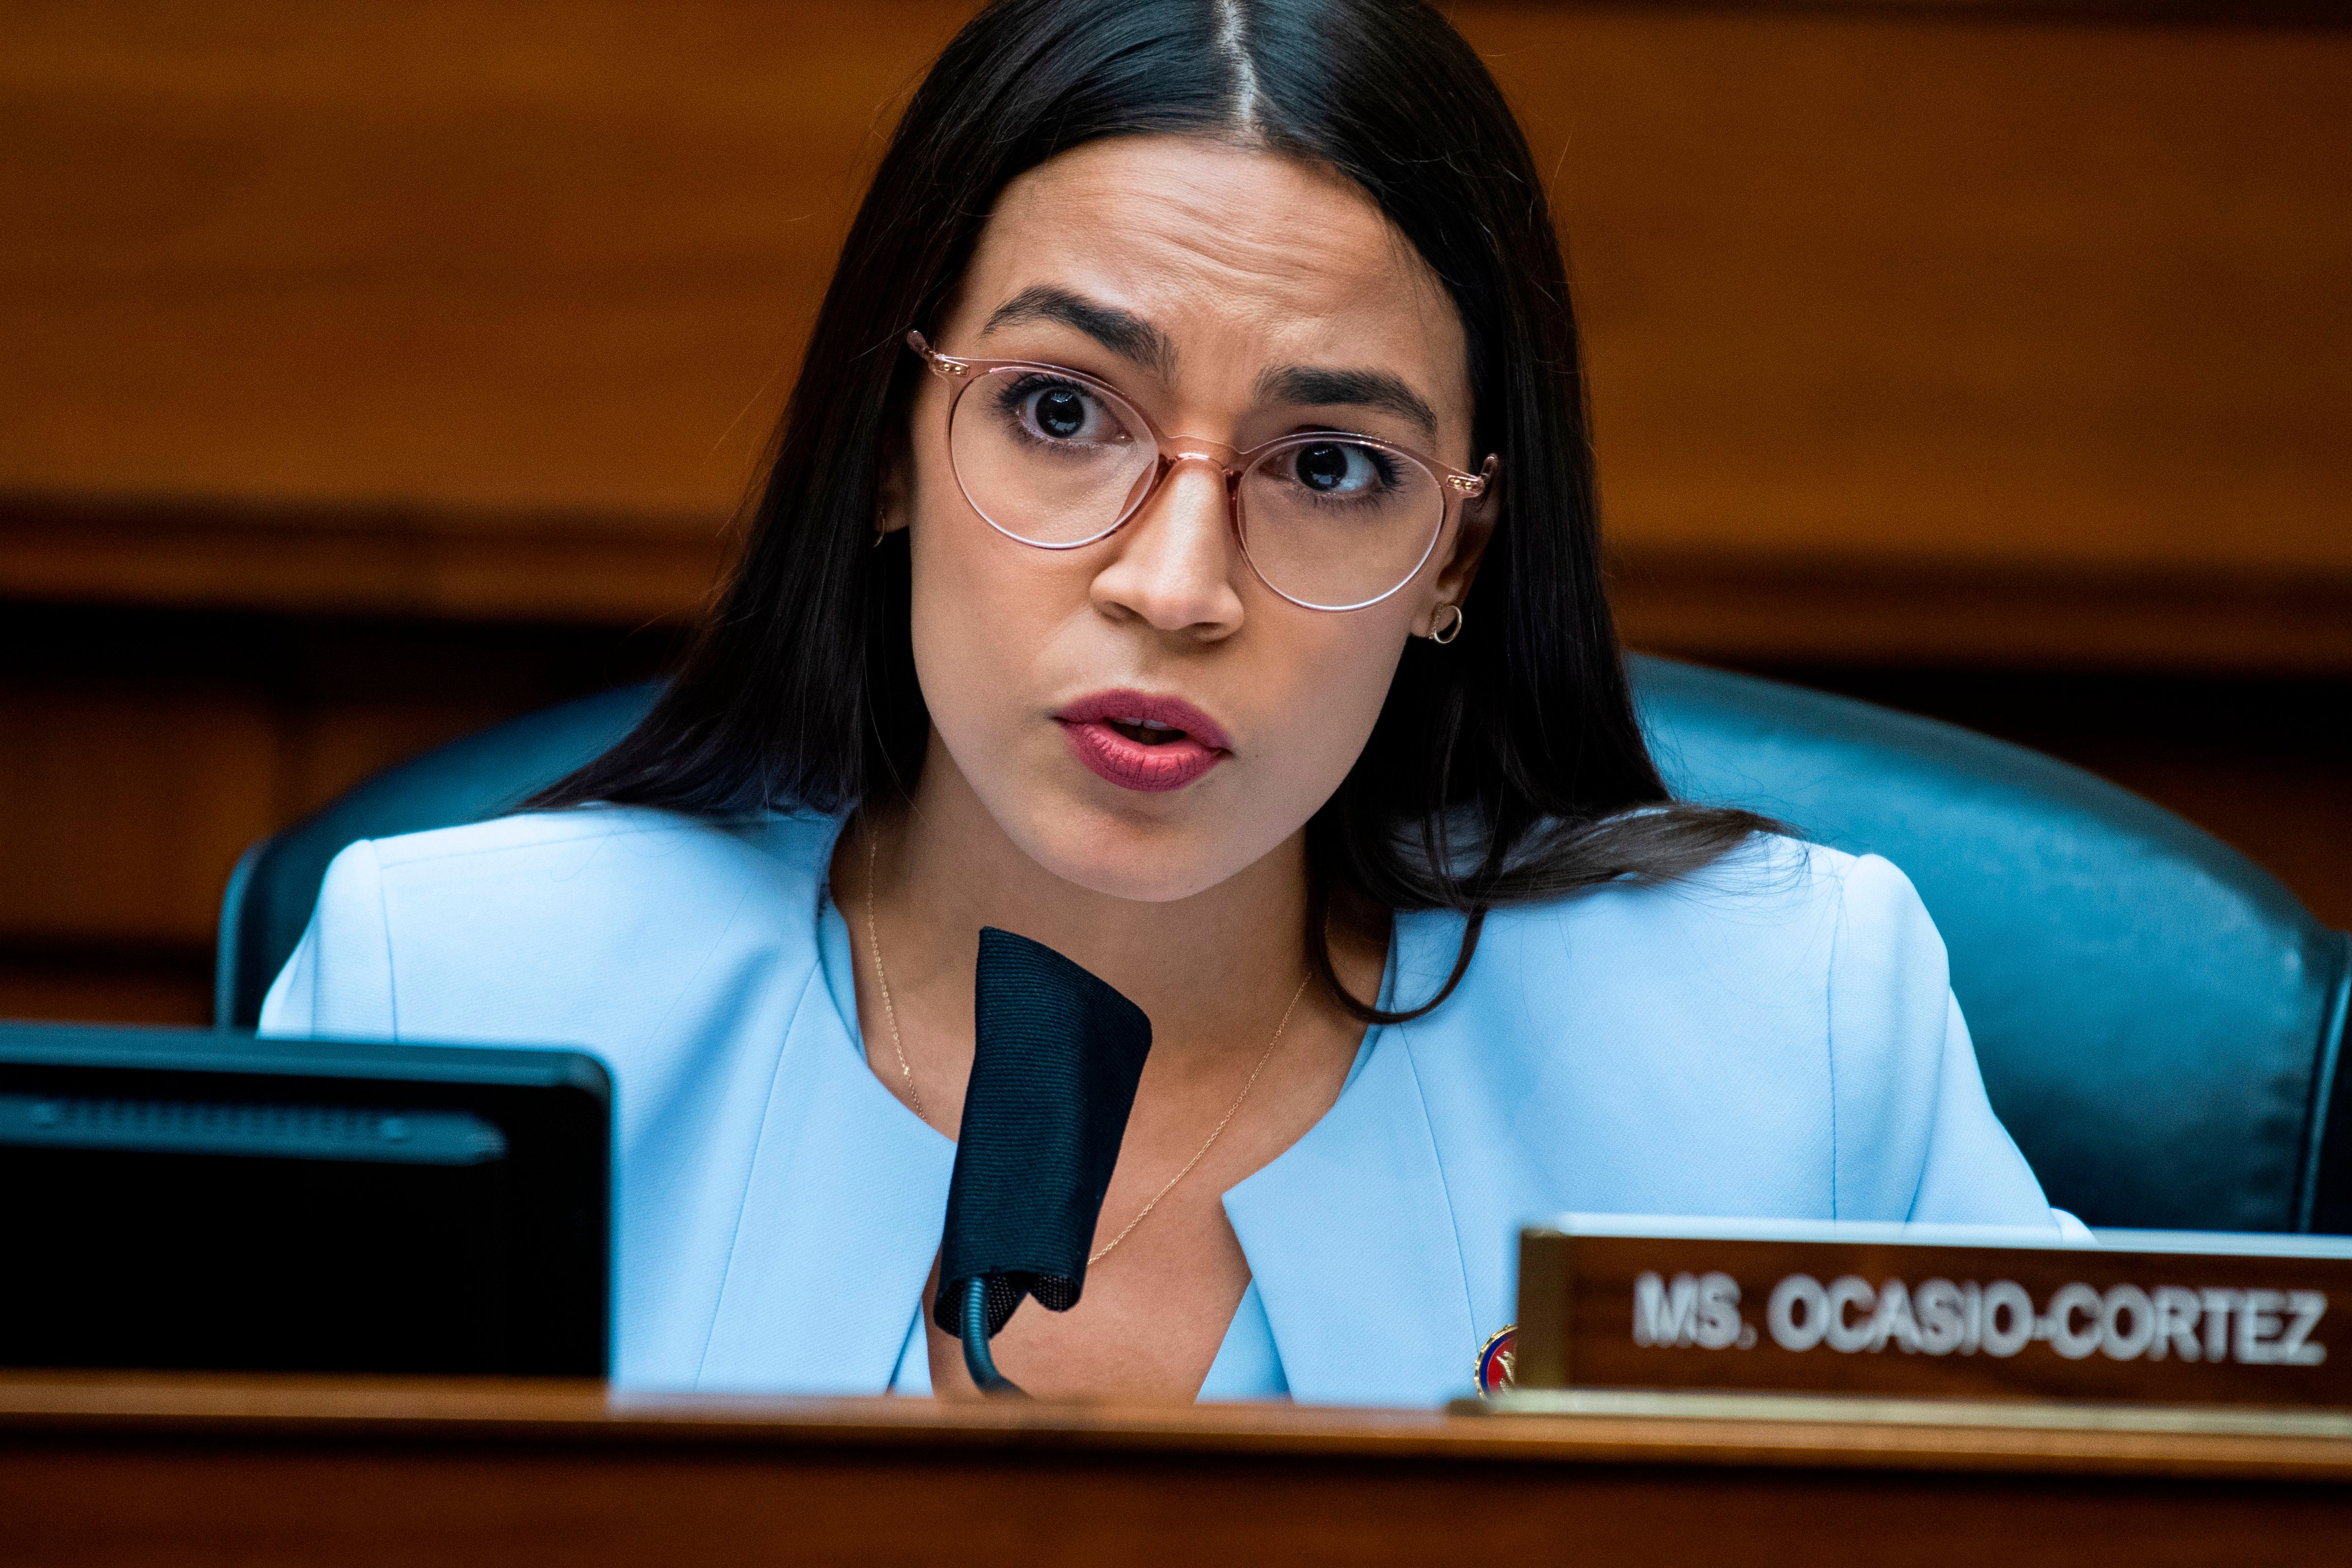 AOC raises $200K to fight food and housing insecurity during video game battle